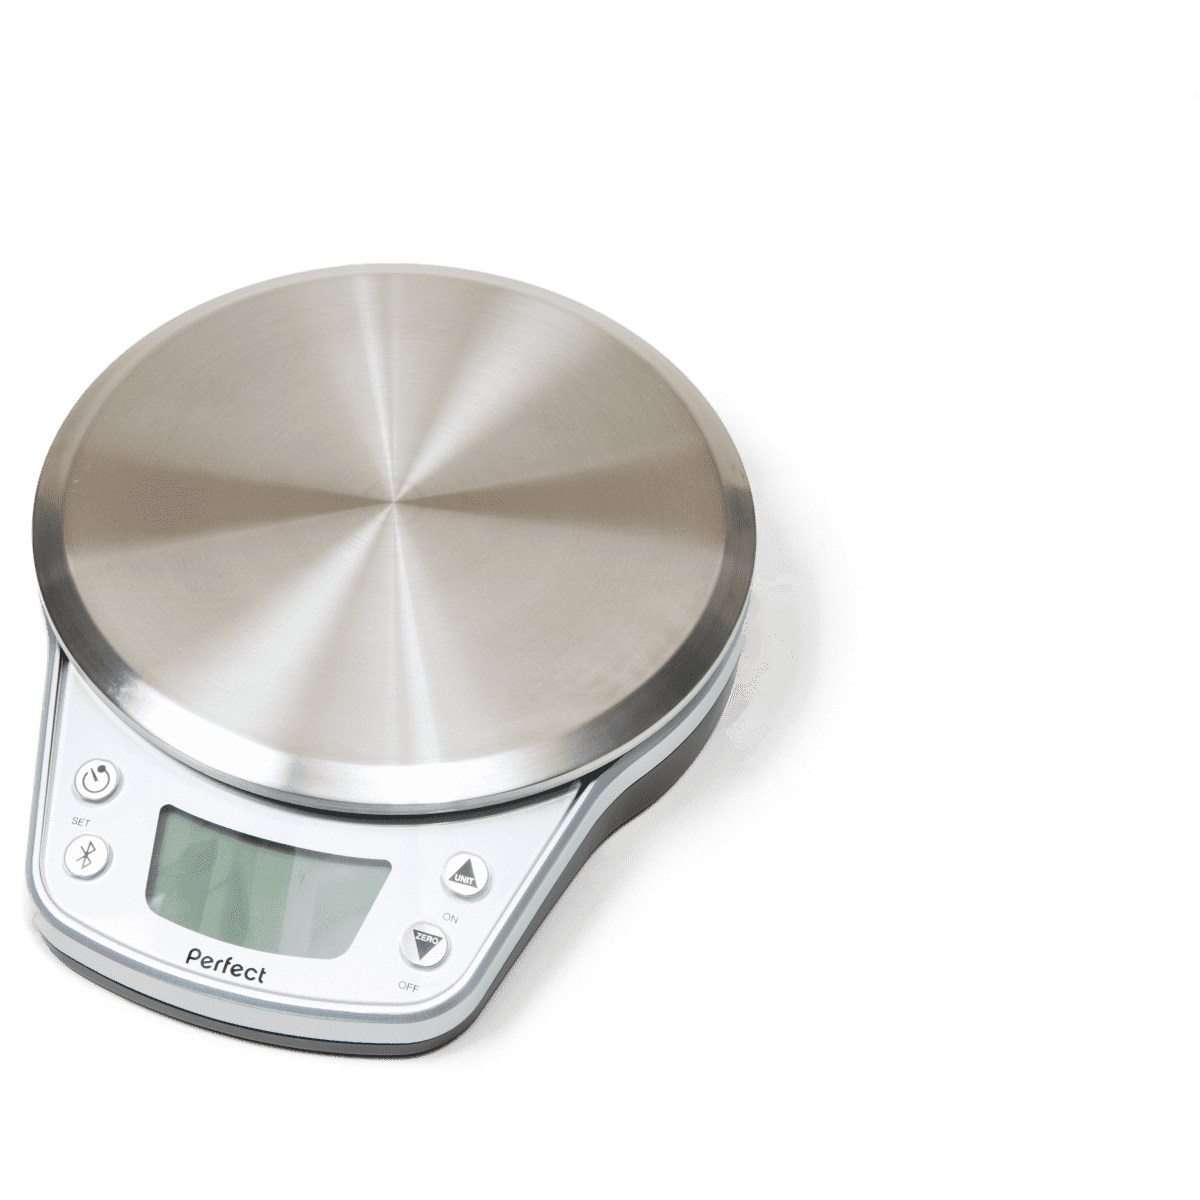 The Best Smart Scales Cooks Illustrated